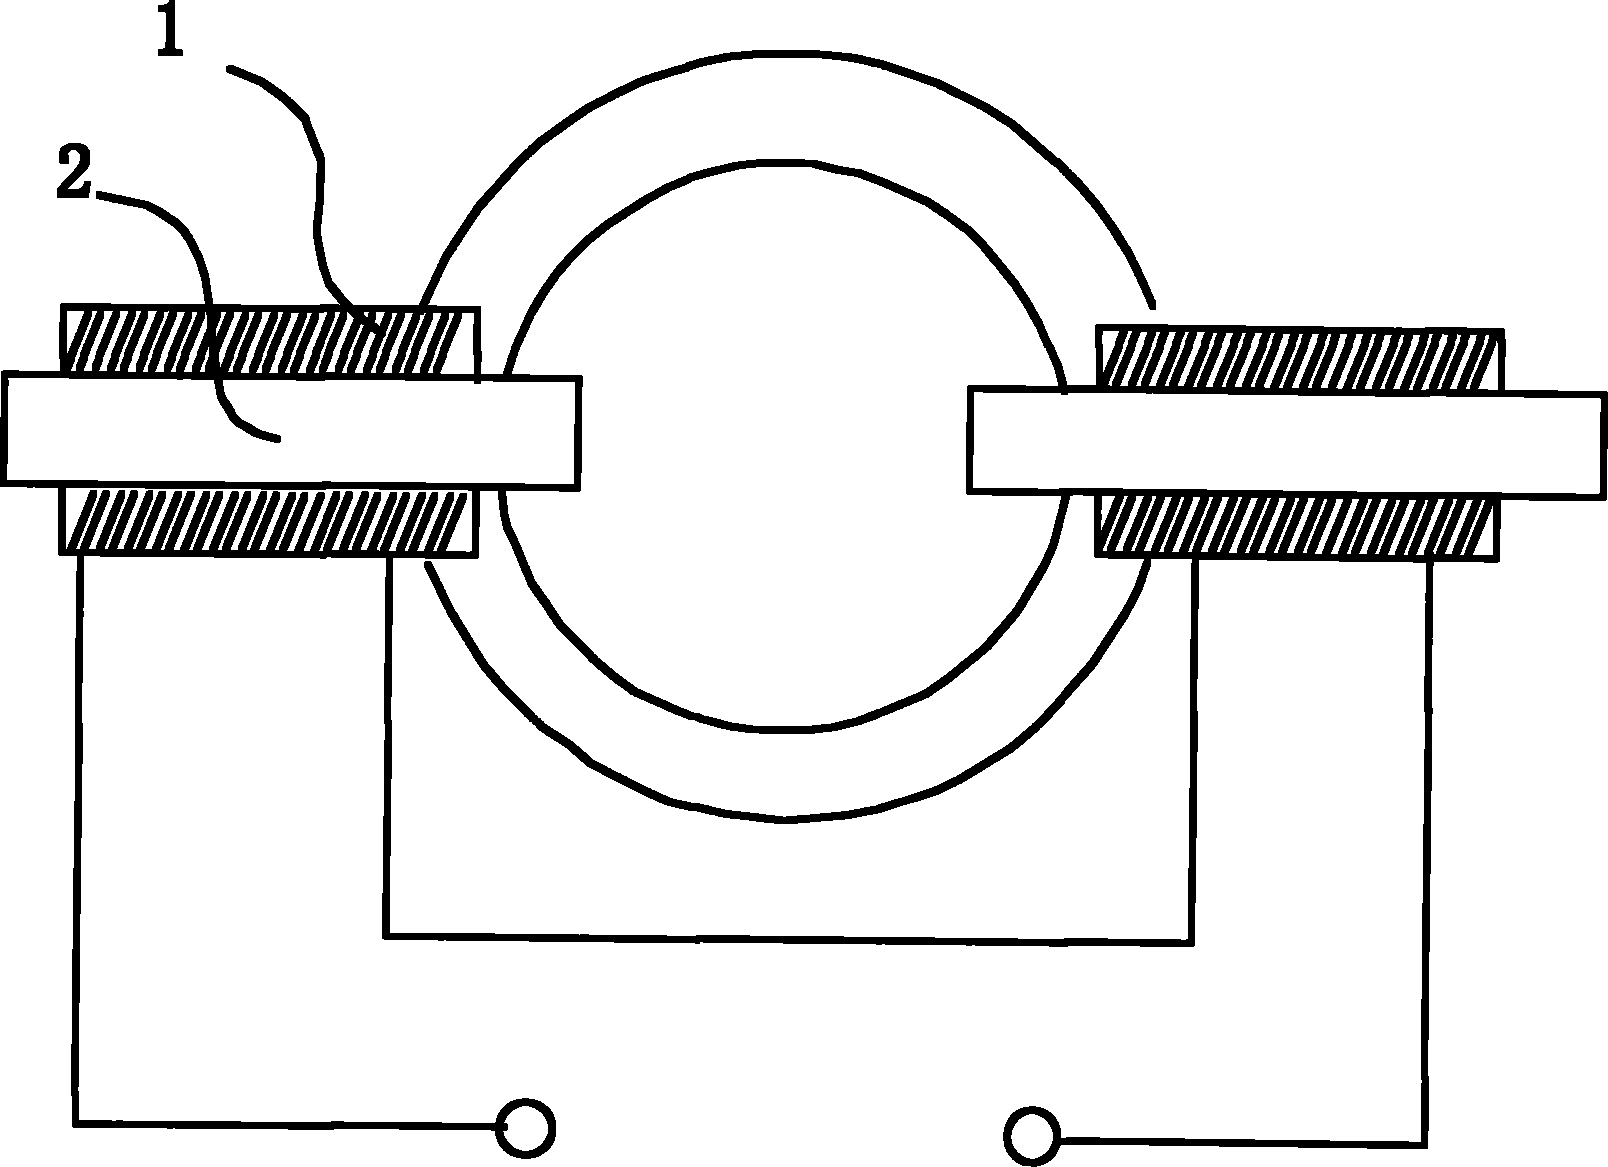 Method for compound magnetic powder flaw detection